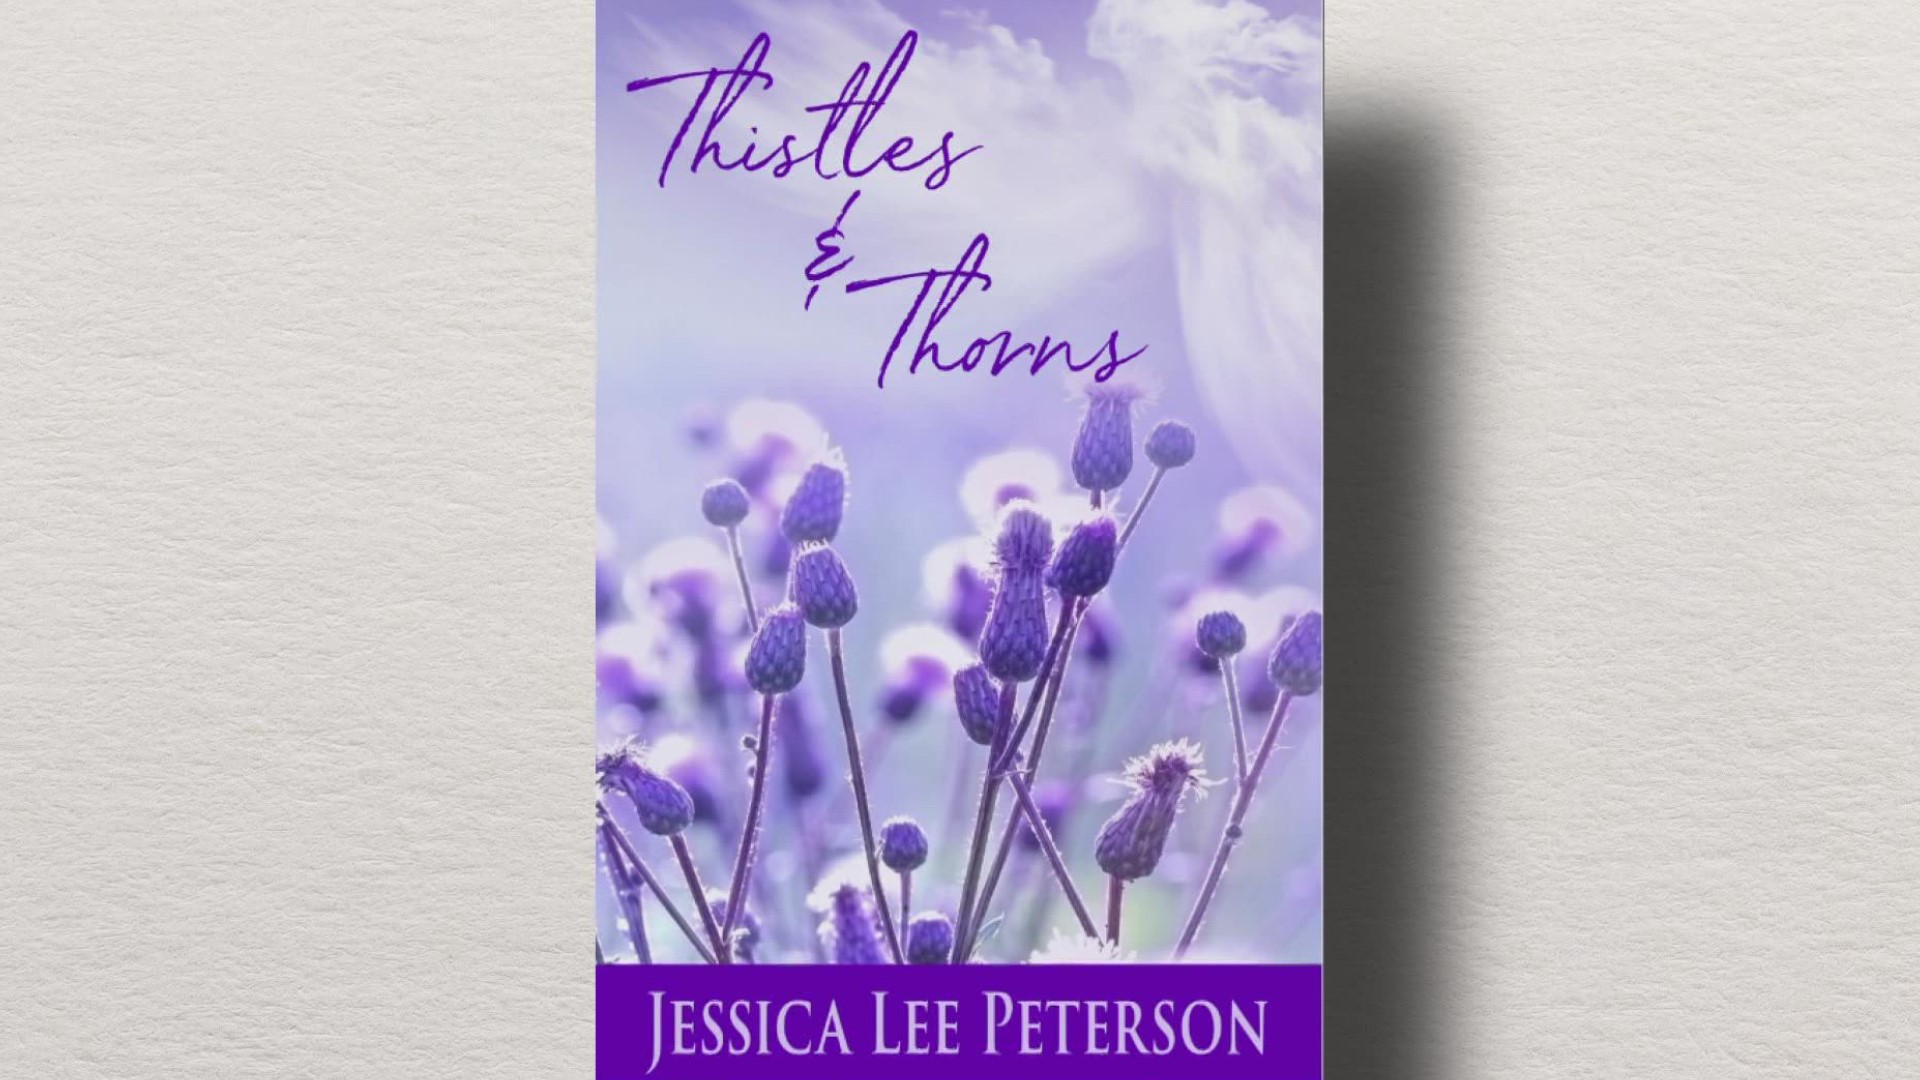 Thistles & Thorns can be pre-ordered ahead of its release on October 25.